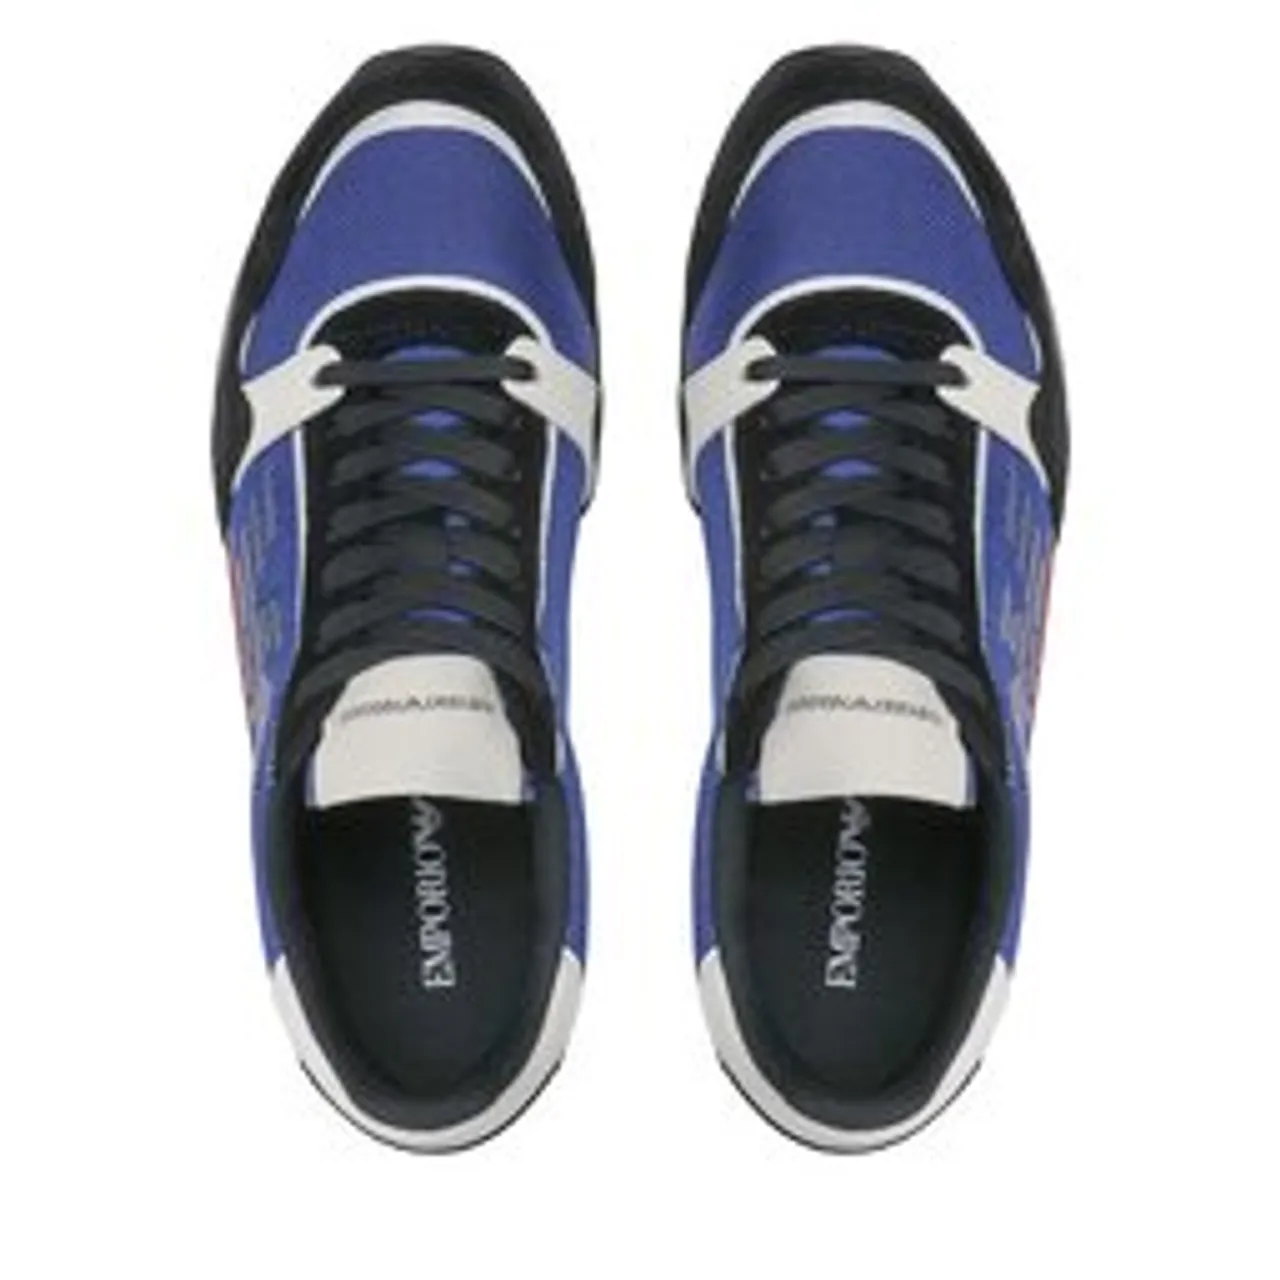 Sneakers Emporio Armani X4X537 XM678 S155 Navy/Bluet/Of Wh/Red